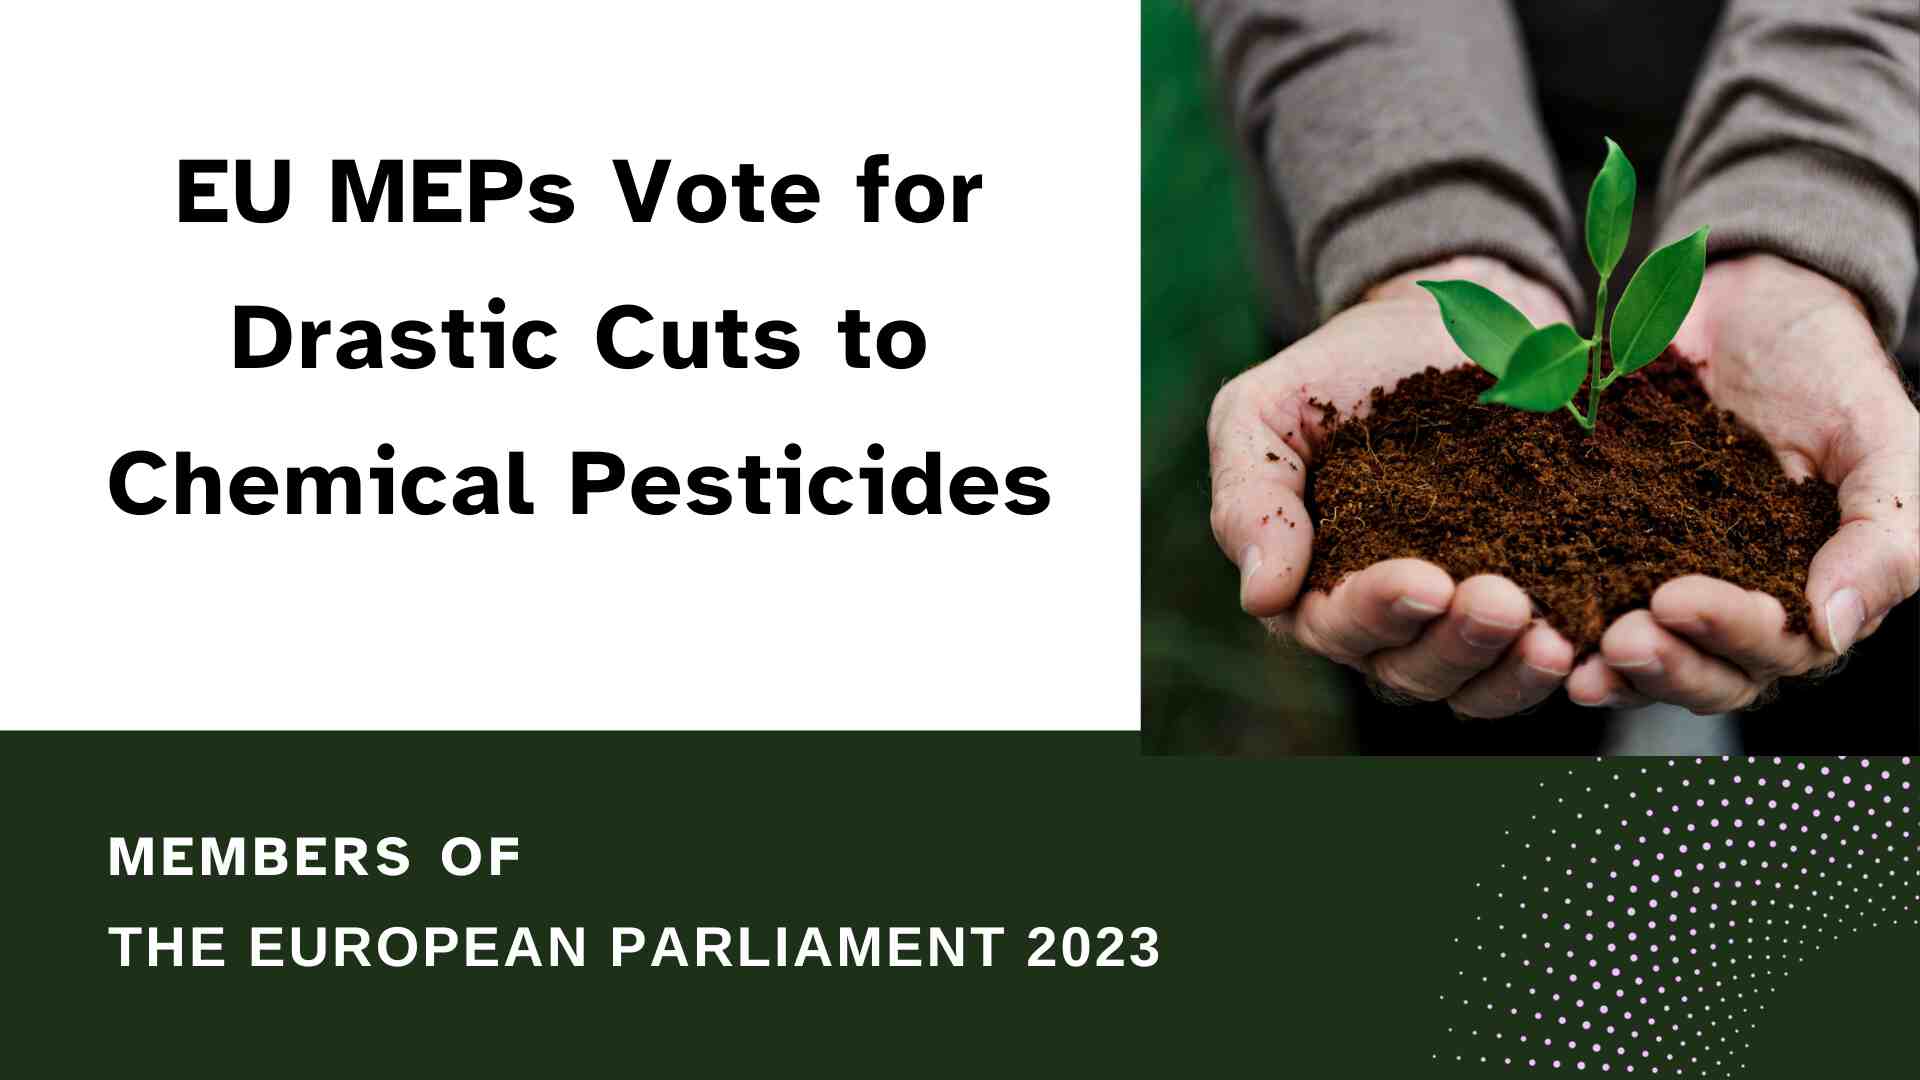 MEPs want the use of chemical pesticides to be drastically reduced